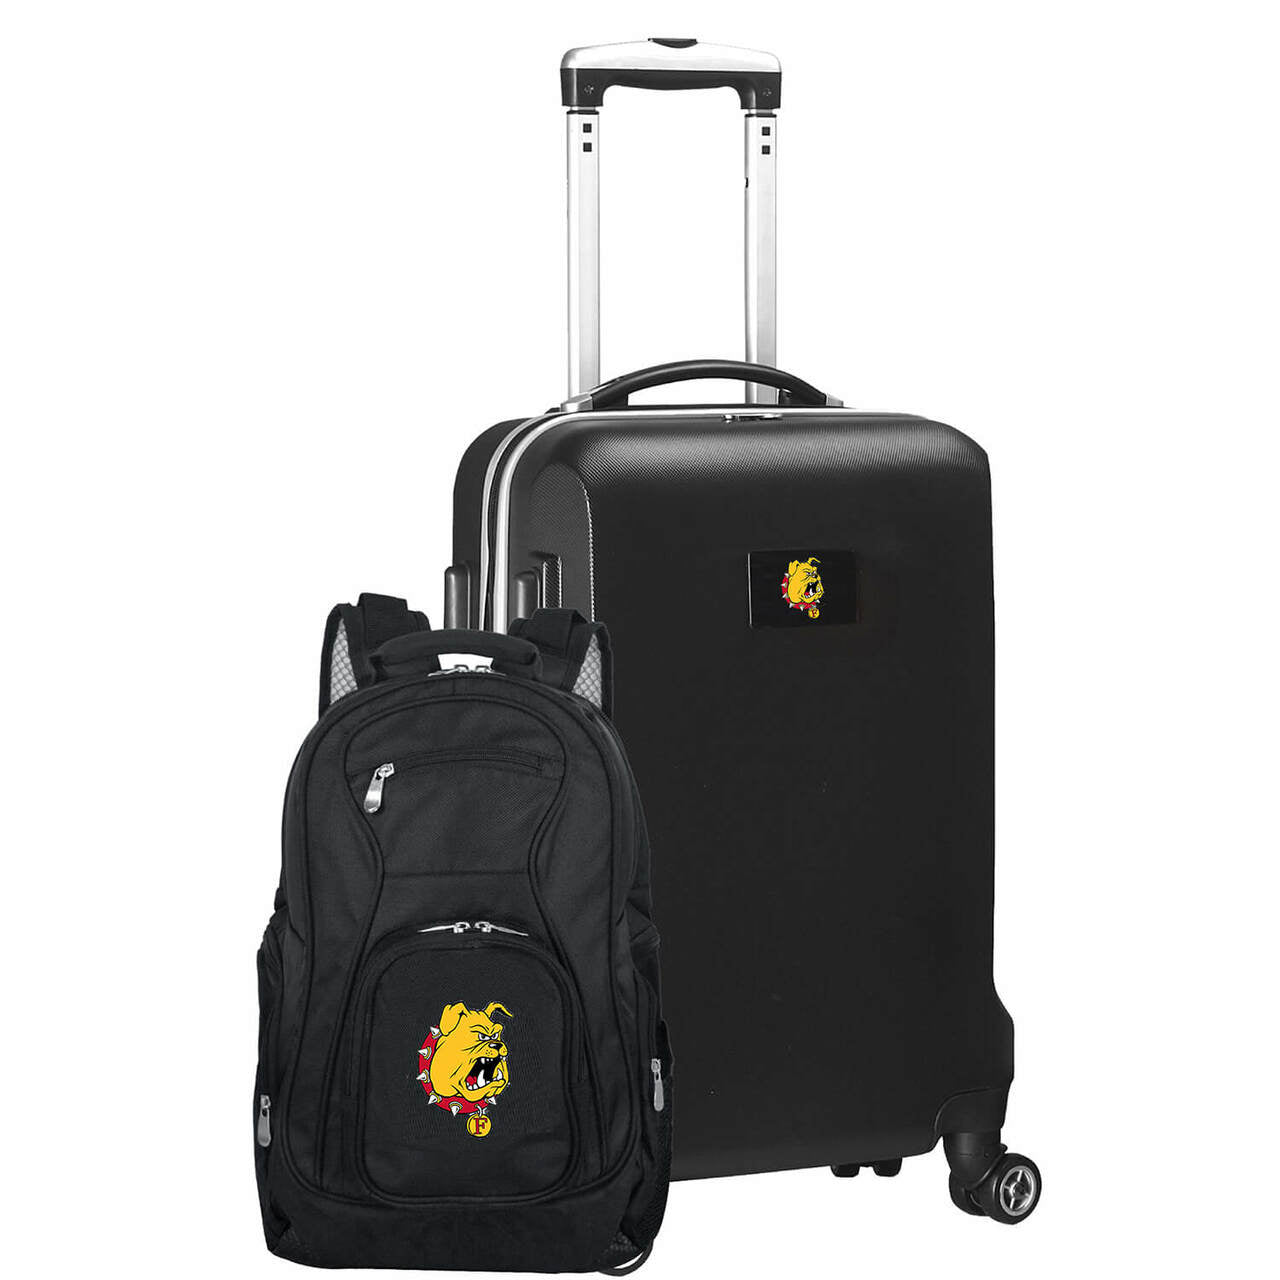 Ferris State Bulldogs Deluxe 2-Piece Backpack and Carry-on Set in Black